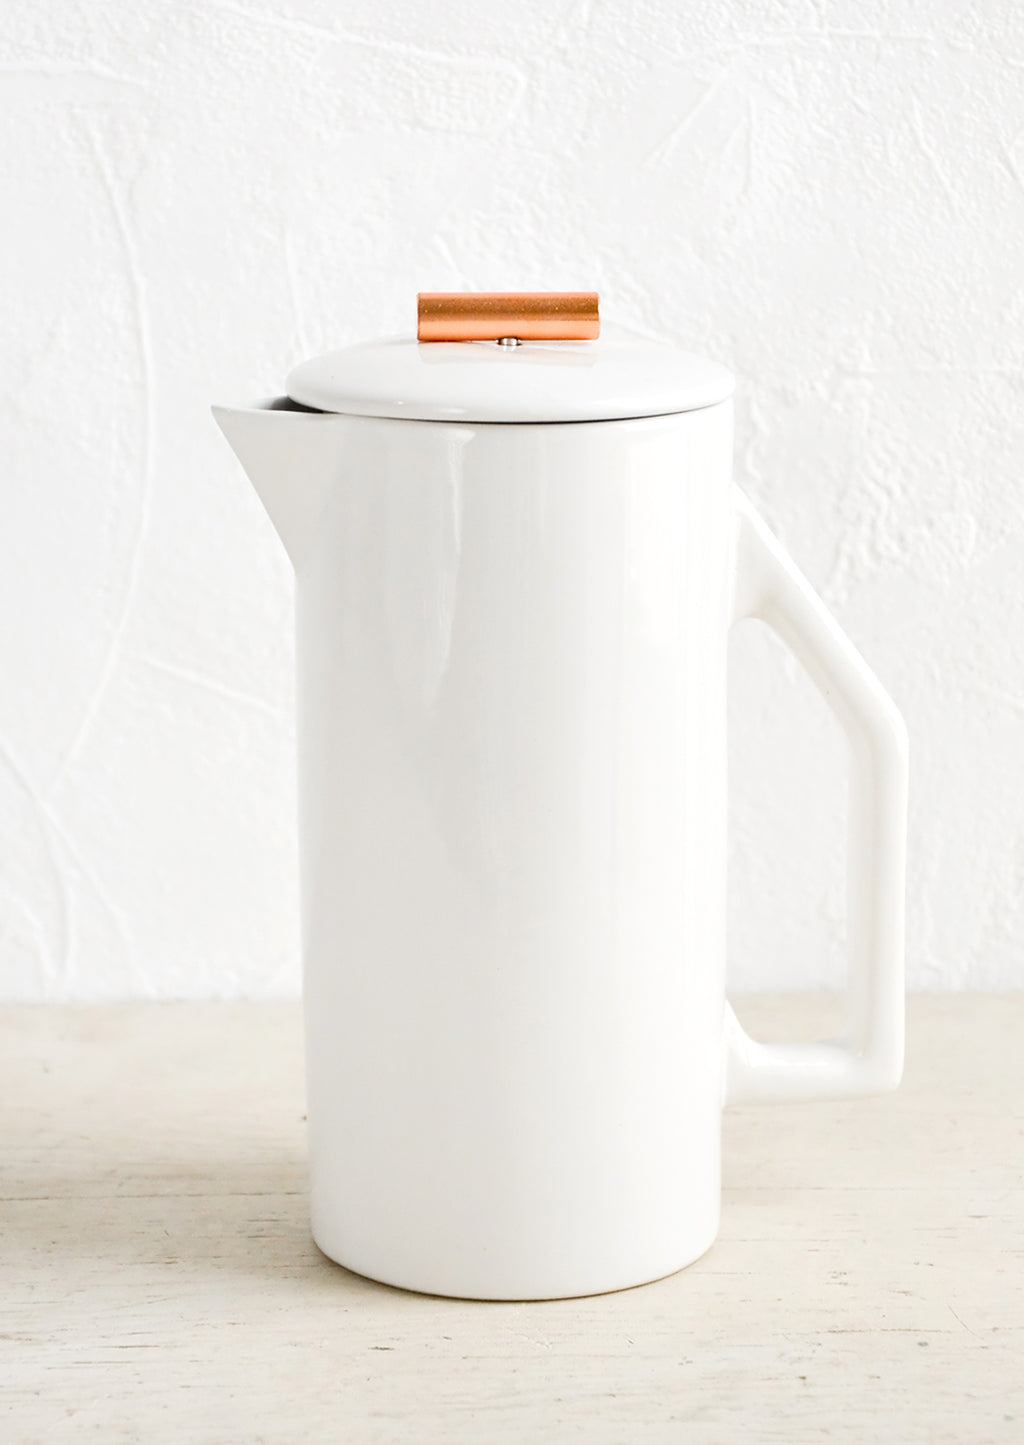 White Ceramic: A french press coffee maker made from white ceramic with a copper rod on lid.